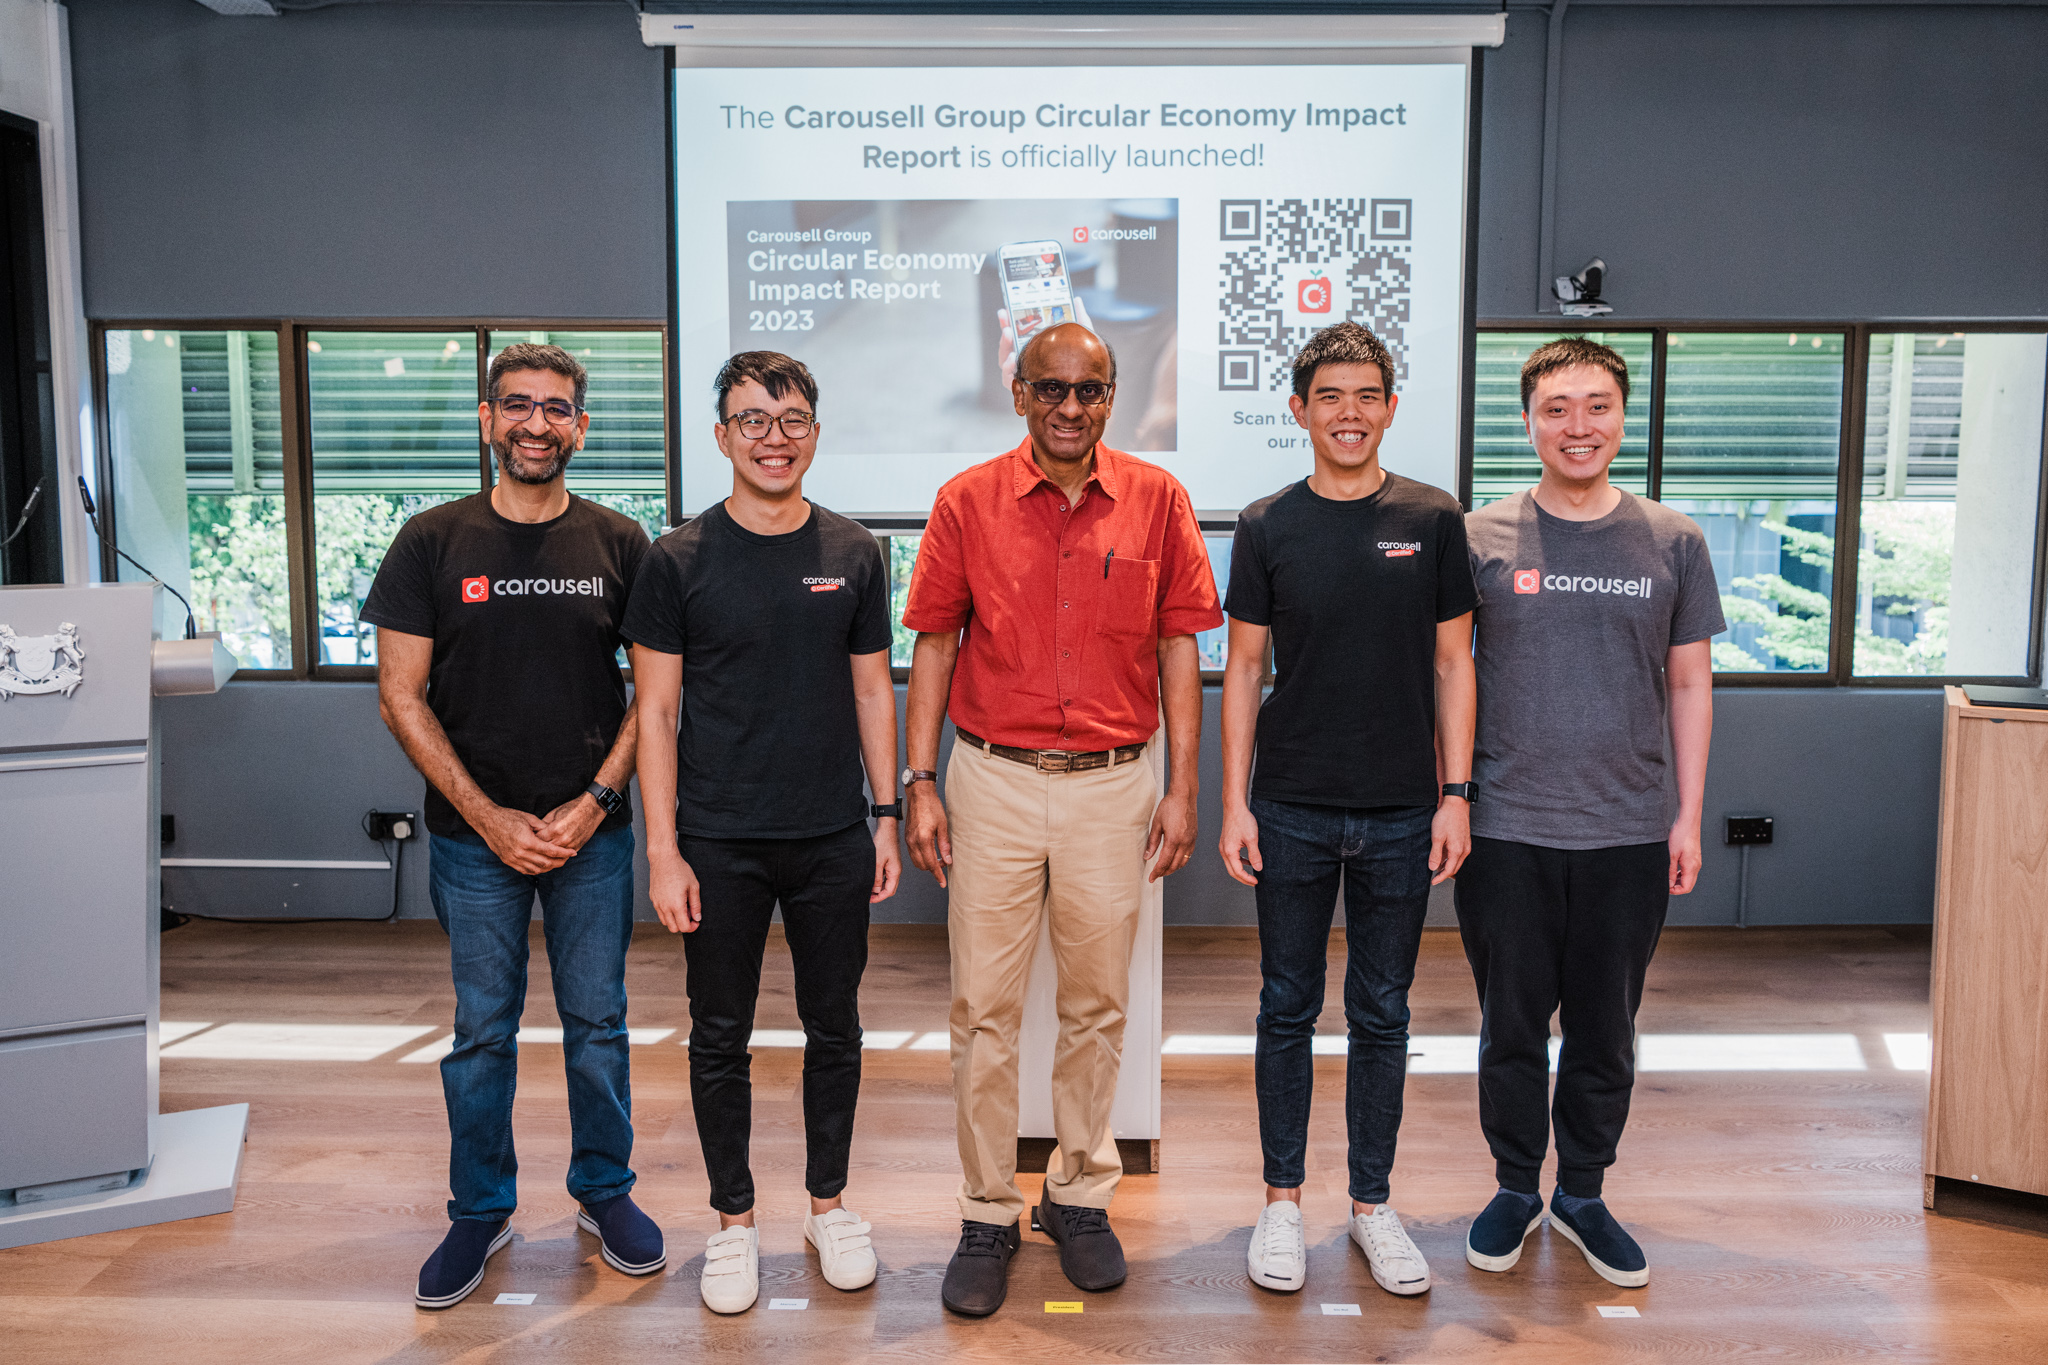 Mr Tharman Shanmugaratnam, President of the Republic of Singapore, graced the launch event for Carousell Group’s Circular Economy Impact Report at Carousell Campus. (from left to right: Mr Gaurav Bhasin, Chief Strategy Officer, Carousell Group; Marcus Tan, Co-founder, Carousell Group; Mr Tharman Shanmugaratnam, President of the Republic of Singapore; Quek Siu Rui, Co-founder and CEO, Carousell Group; Lucas Ngoo, Co-founder, Carousell Group)